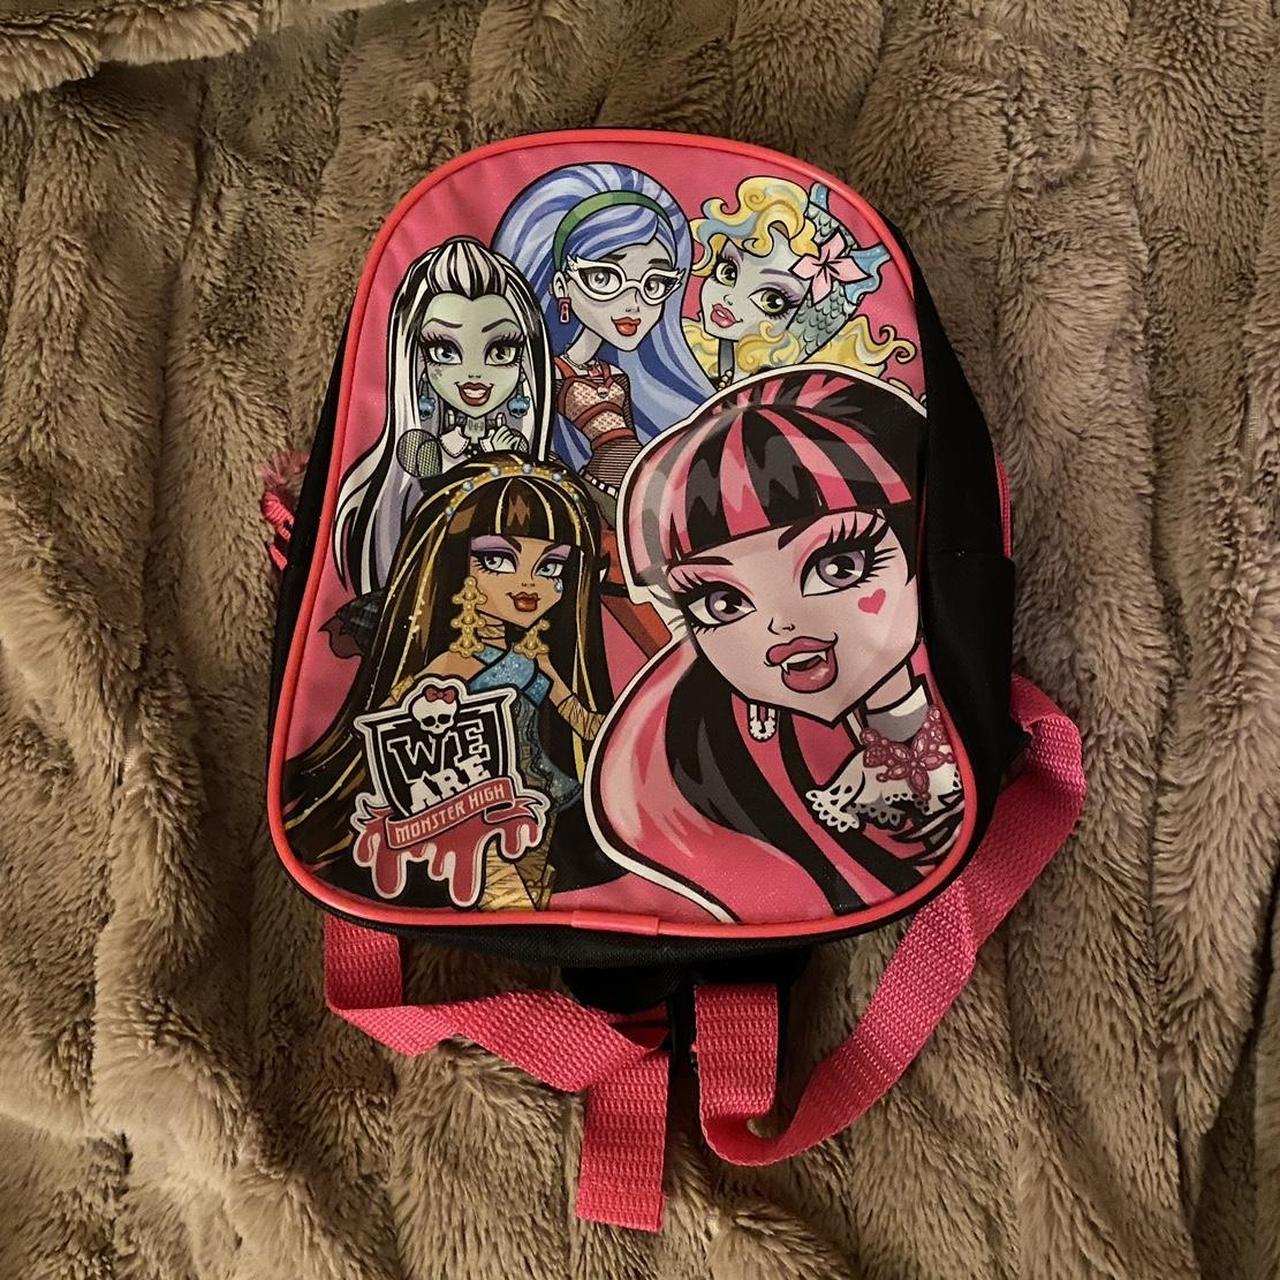 Buy Nwt Monster High Bag Purse Hot Pink Black Glitter Draculaura Frankie  Clawdeen Online at Low Prices in India - Amazon.in